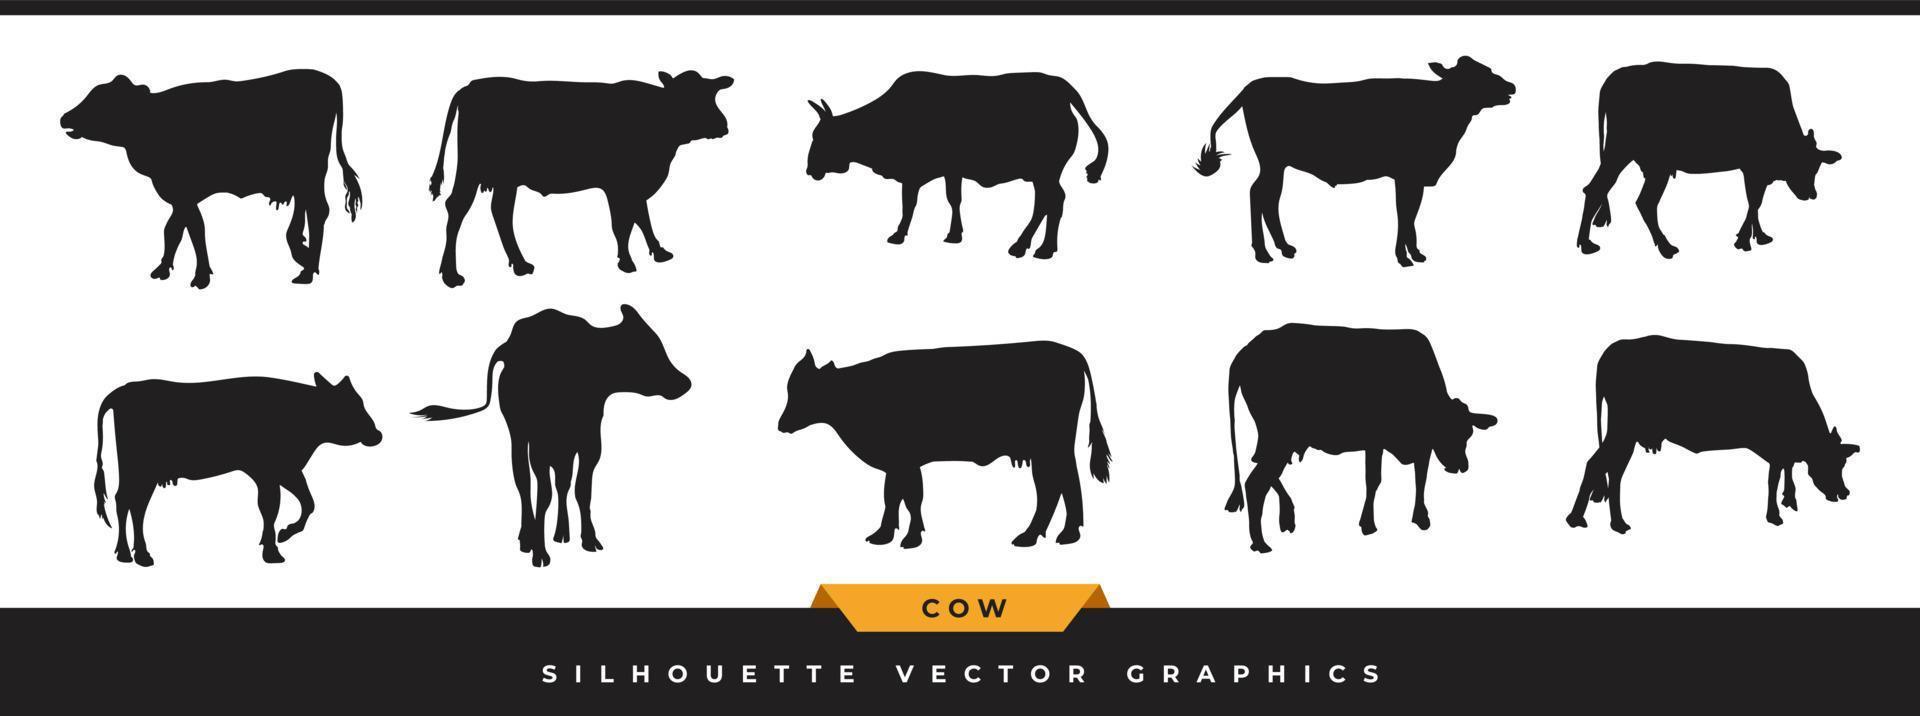 Cow silhouette collection. Big set of livestock, cattle silhouette icons. Hand-drawn farm animal vector illustration in different poses isolated on white background.